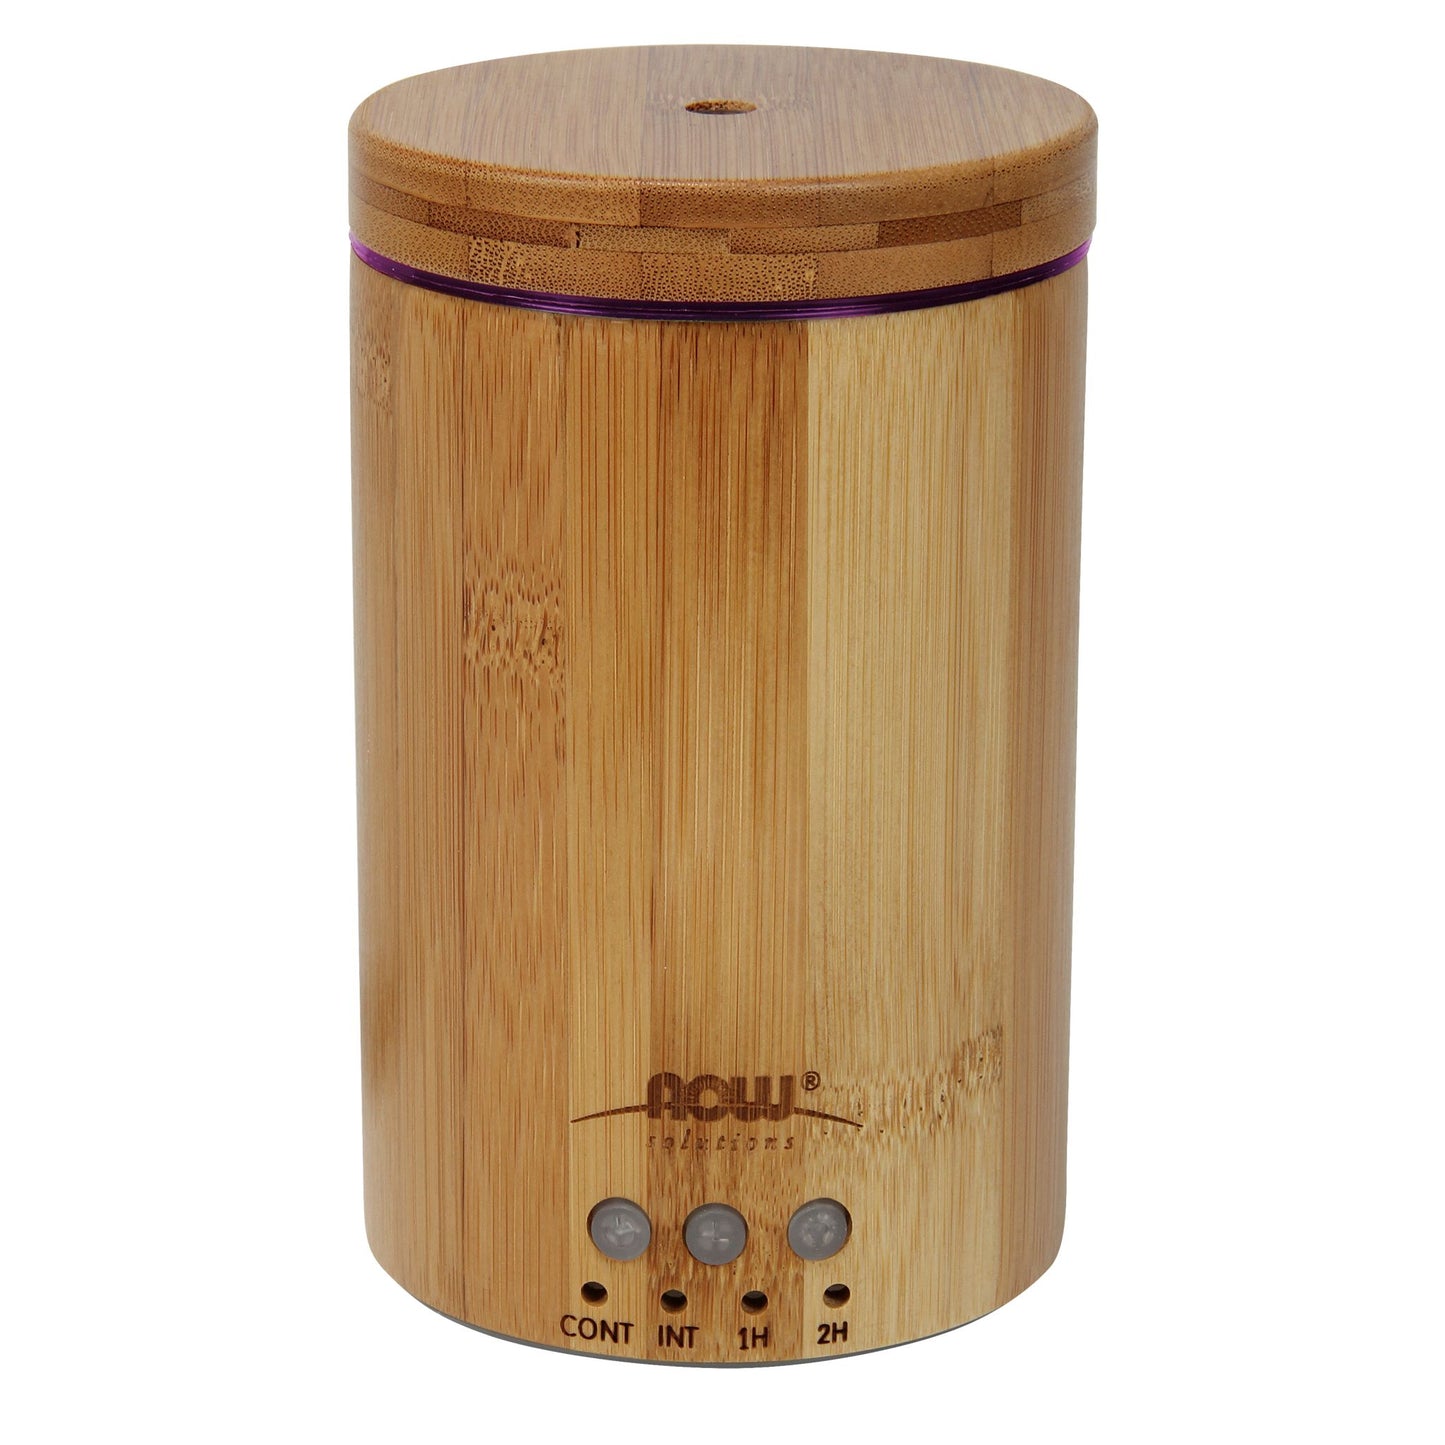 NOW Foods Bamboo Diffuser